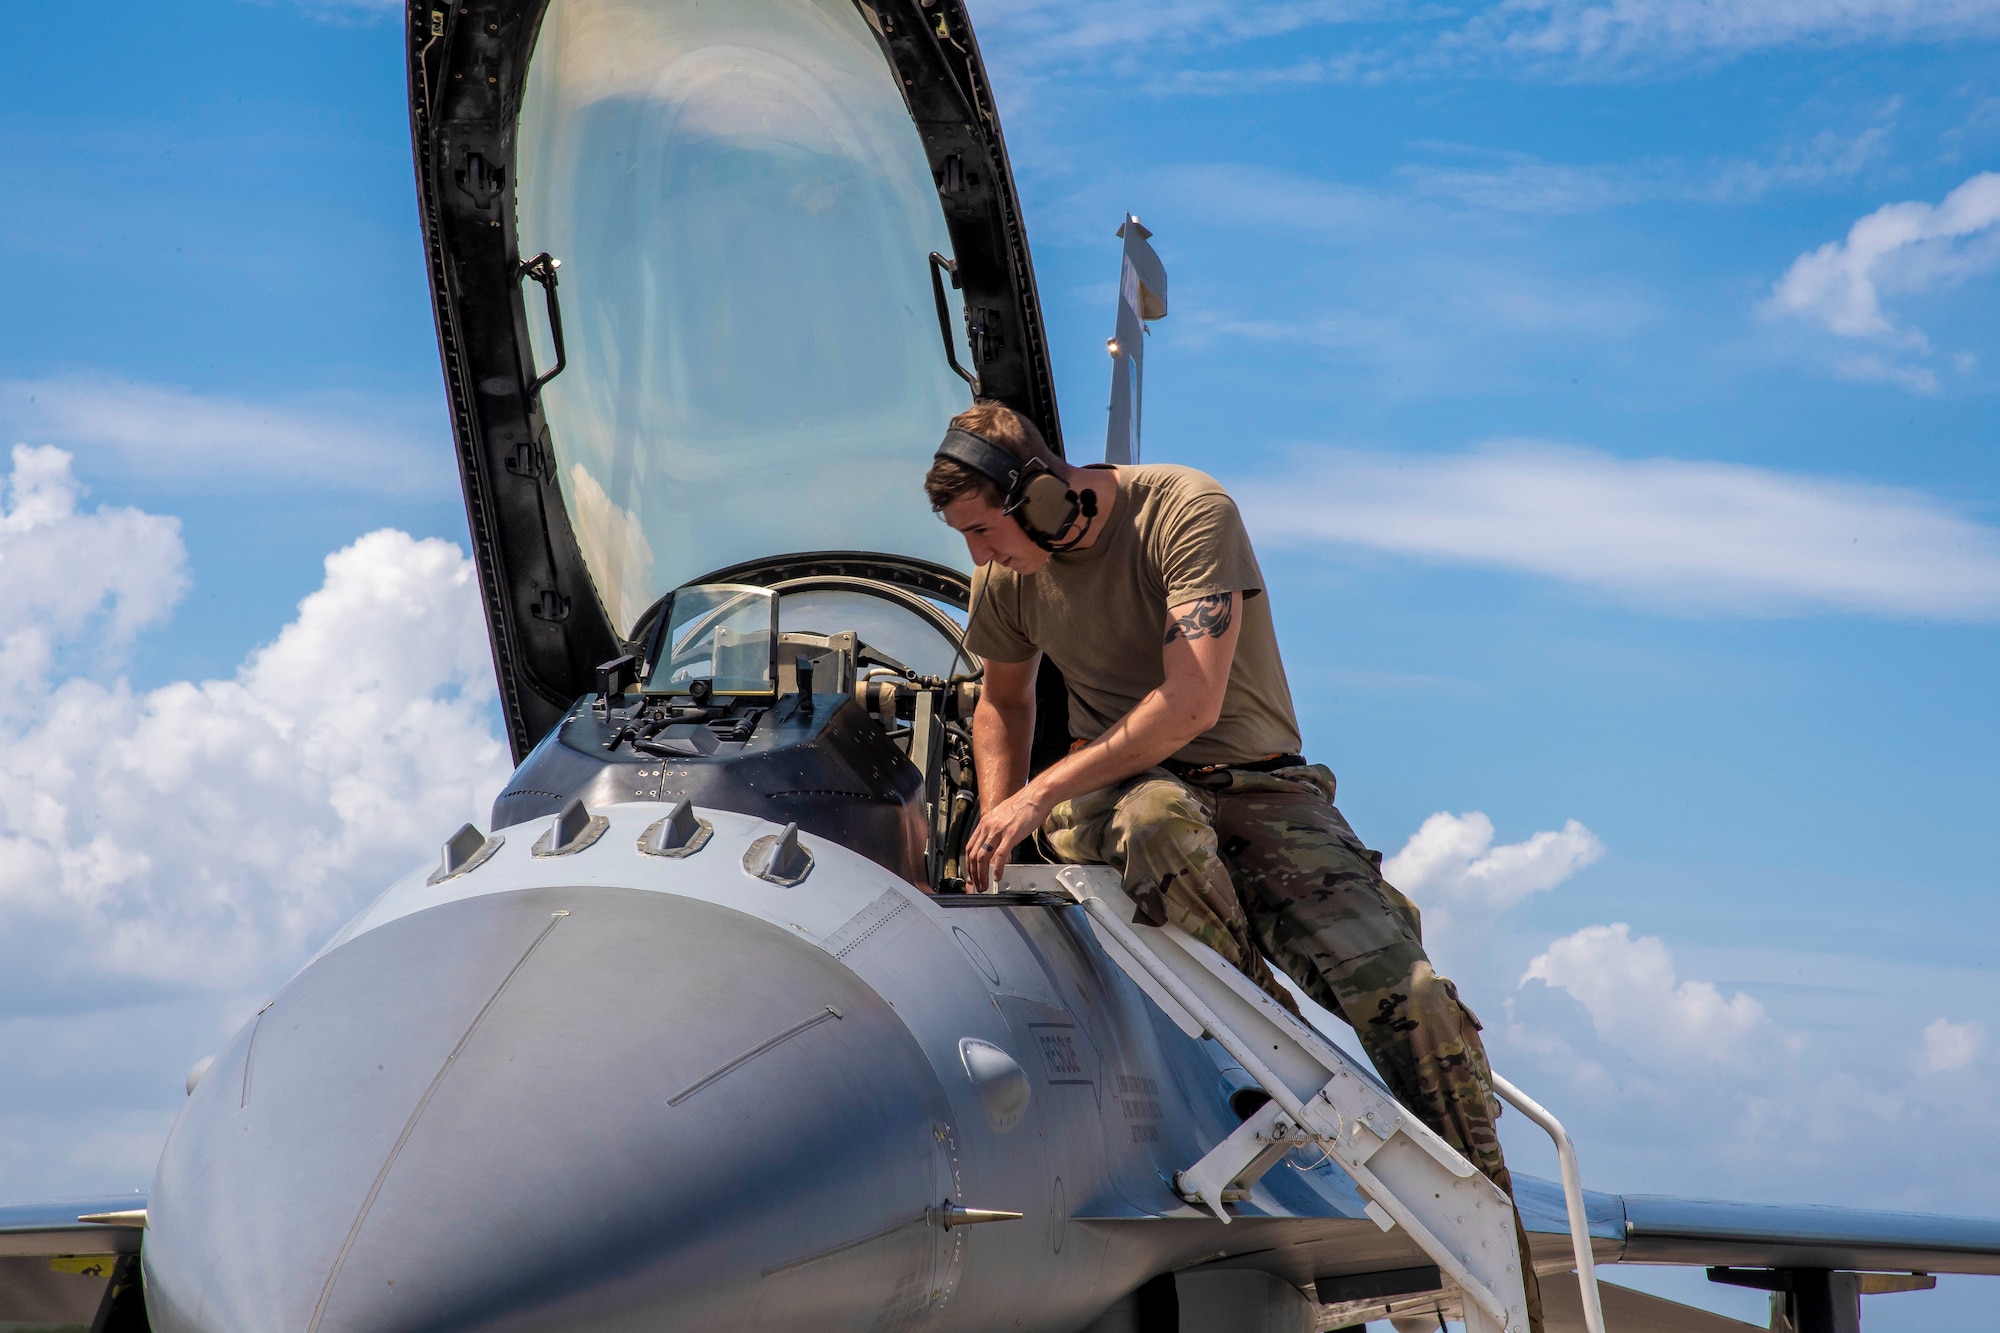 U.S. Air Force Staff Sgt. Chris Rasnick, an avionics technician with the 79th Fighter Squadron, Shaw Air Force Base, South Carolina, performs a preflight check on an F-16 Fighting Falcon aircraft at MacDill Air Force Base, Florida, Sept. 8, 2021.